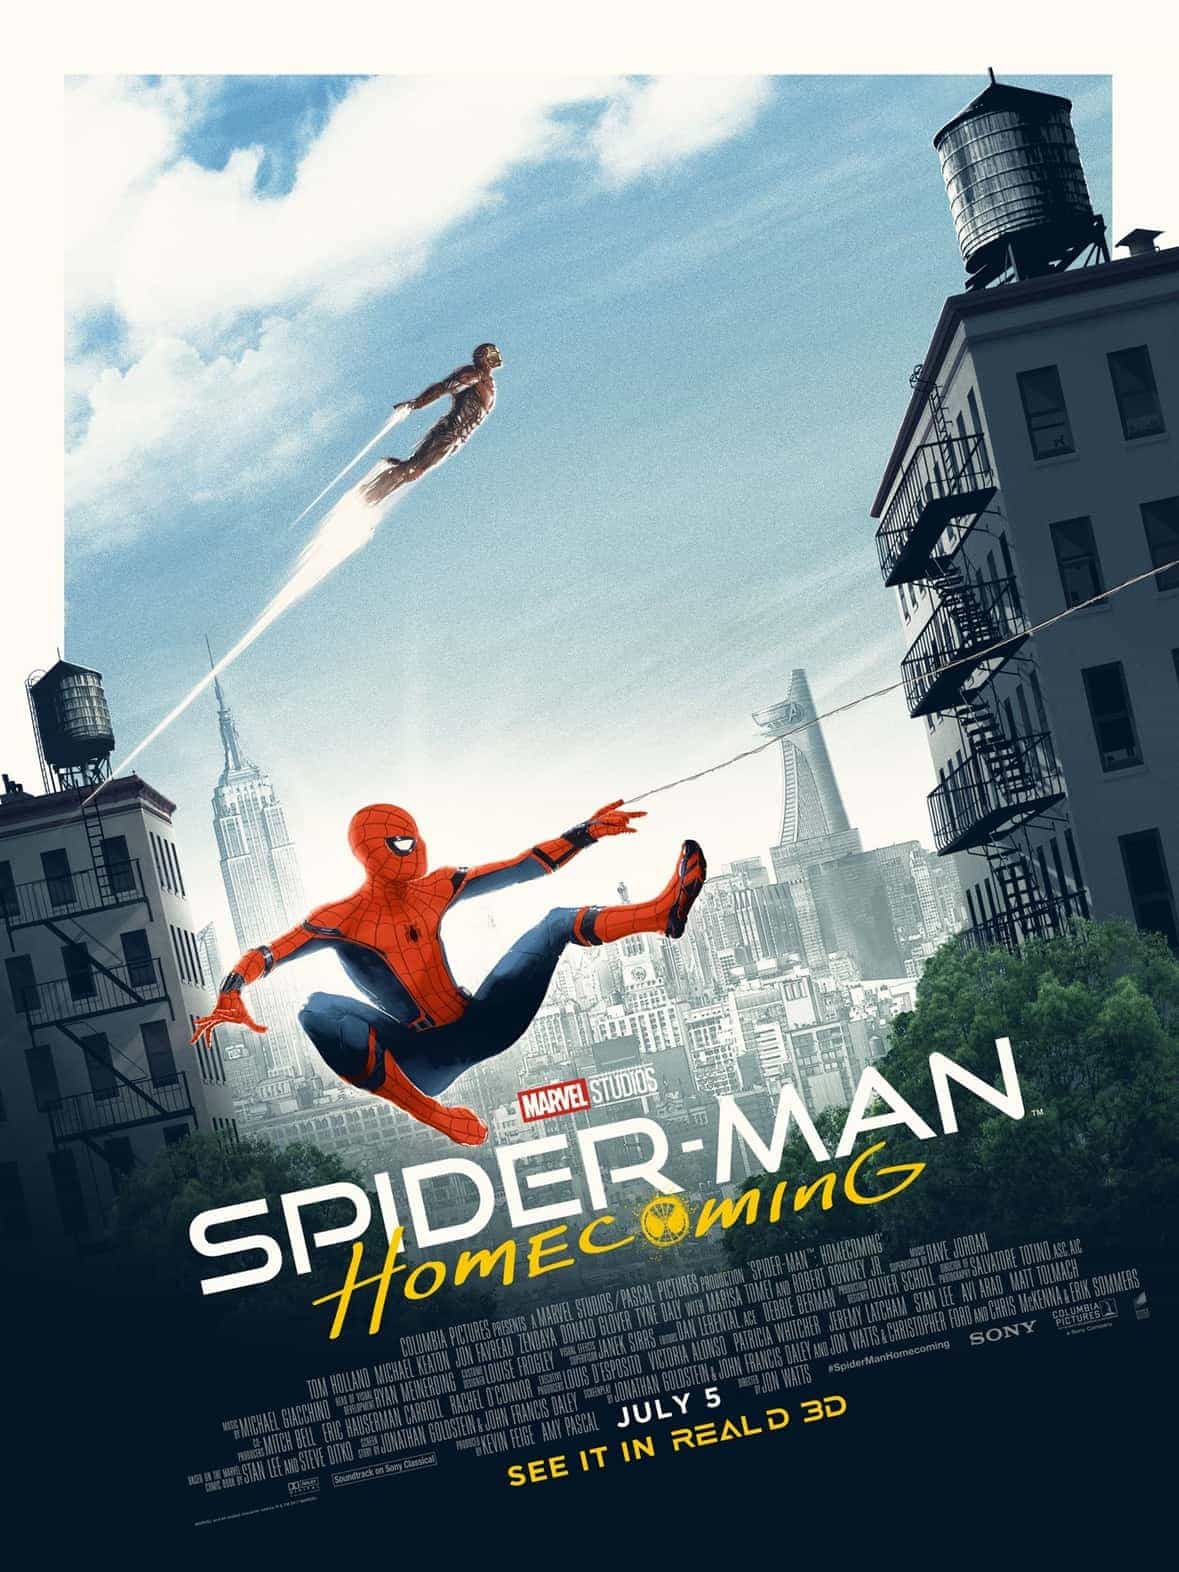 Global Box Office Weekend Report 16th - 18th July 2017: Spider-Man hold the top for a second week, War for the Planet of the Apes comes in at 2